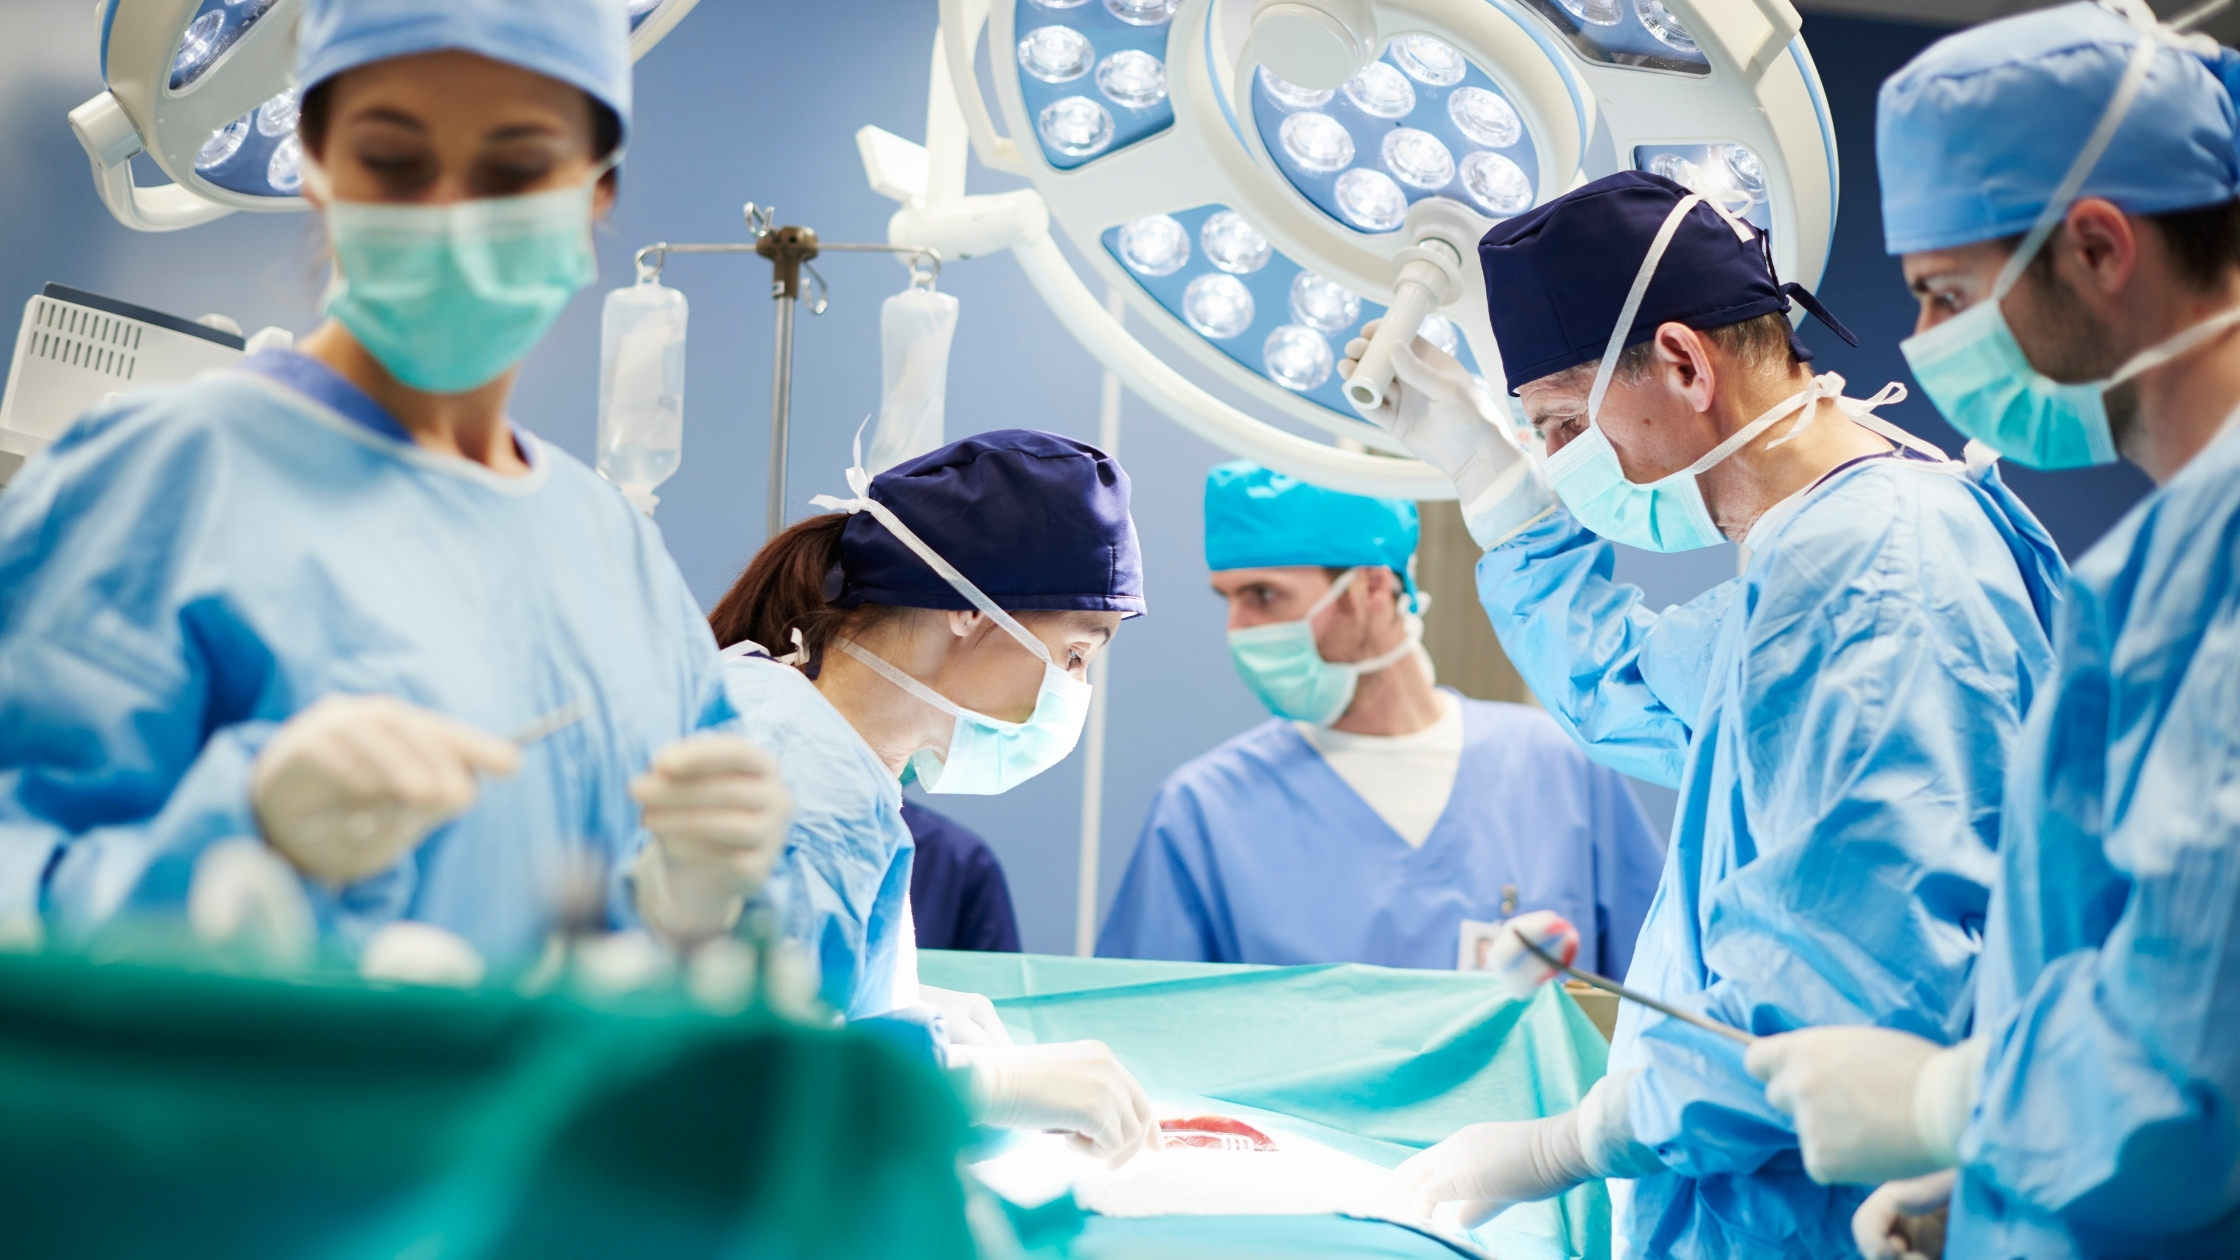 New Jersey will allow Elective Surgery at ASC and Hospitals from May 26, 2020